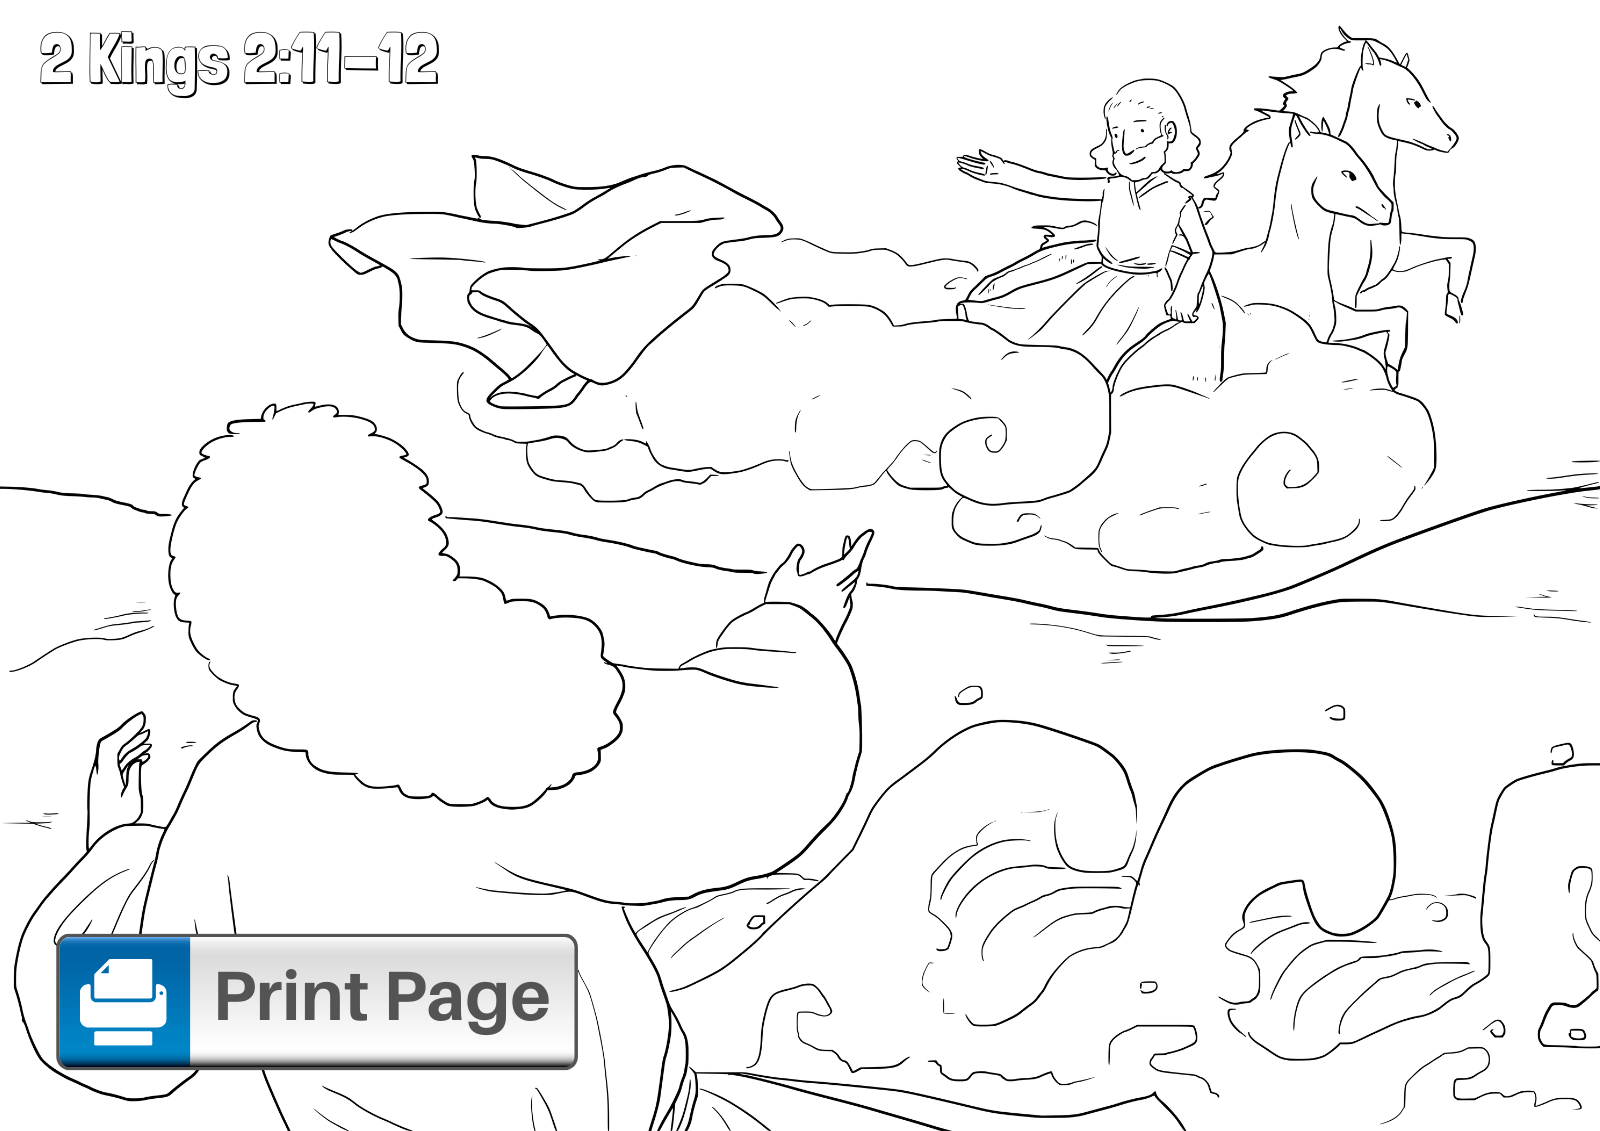 Elijah and the Chariot of Fire Coloring Page